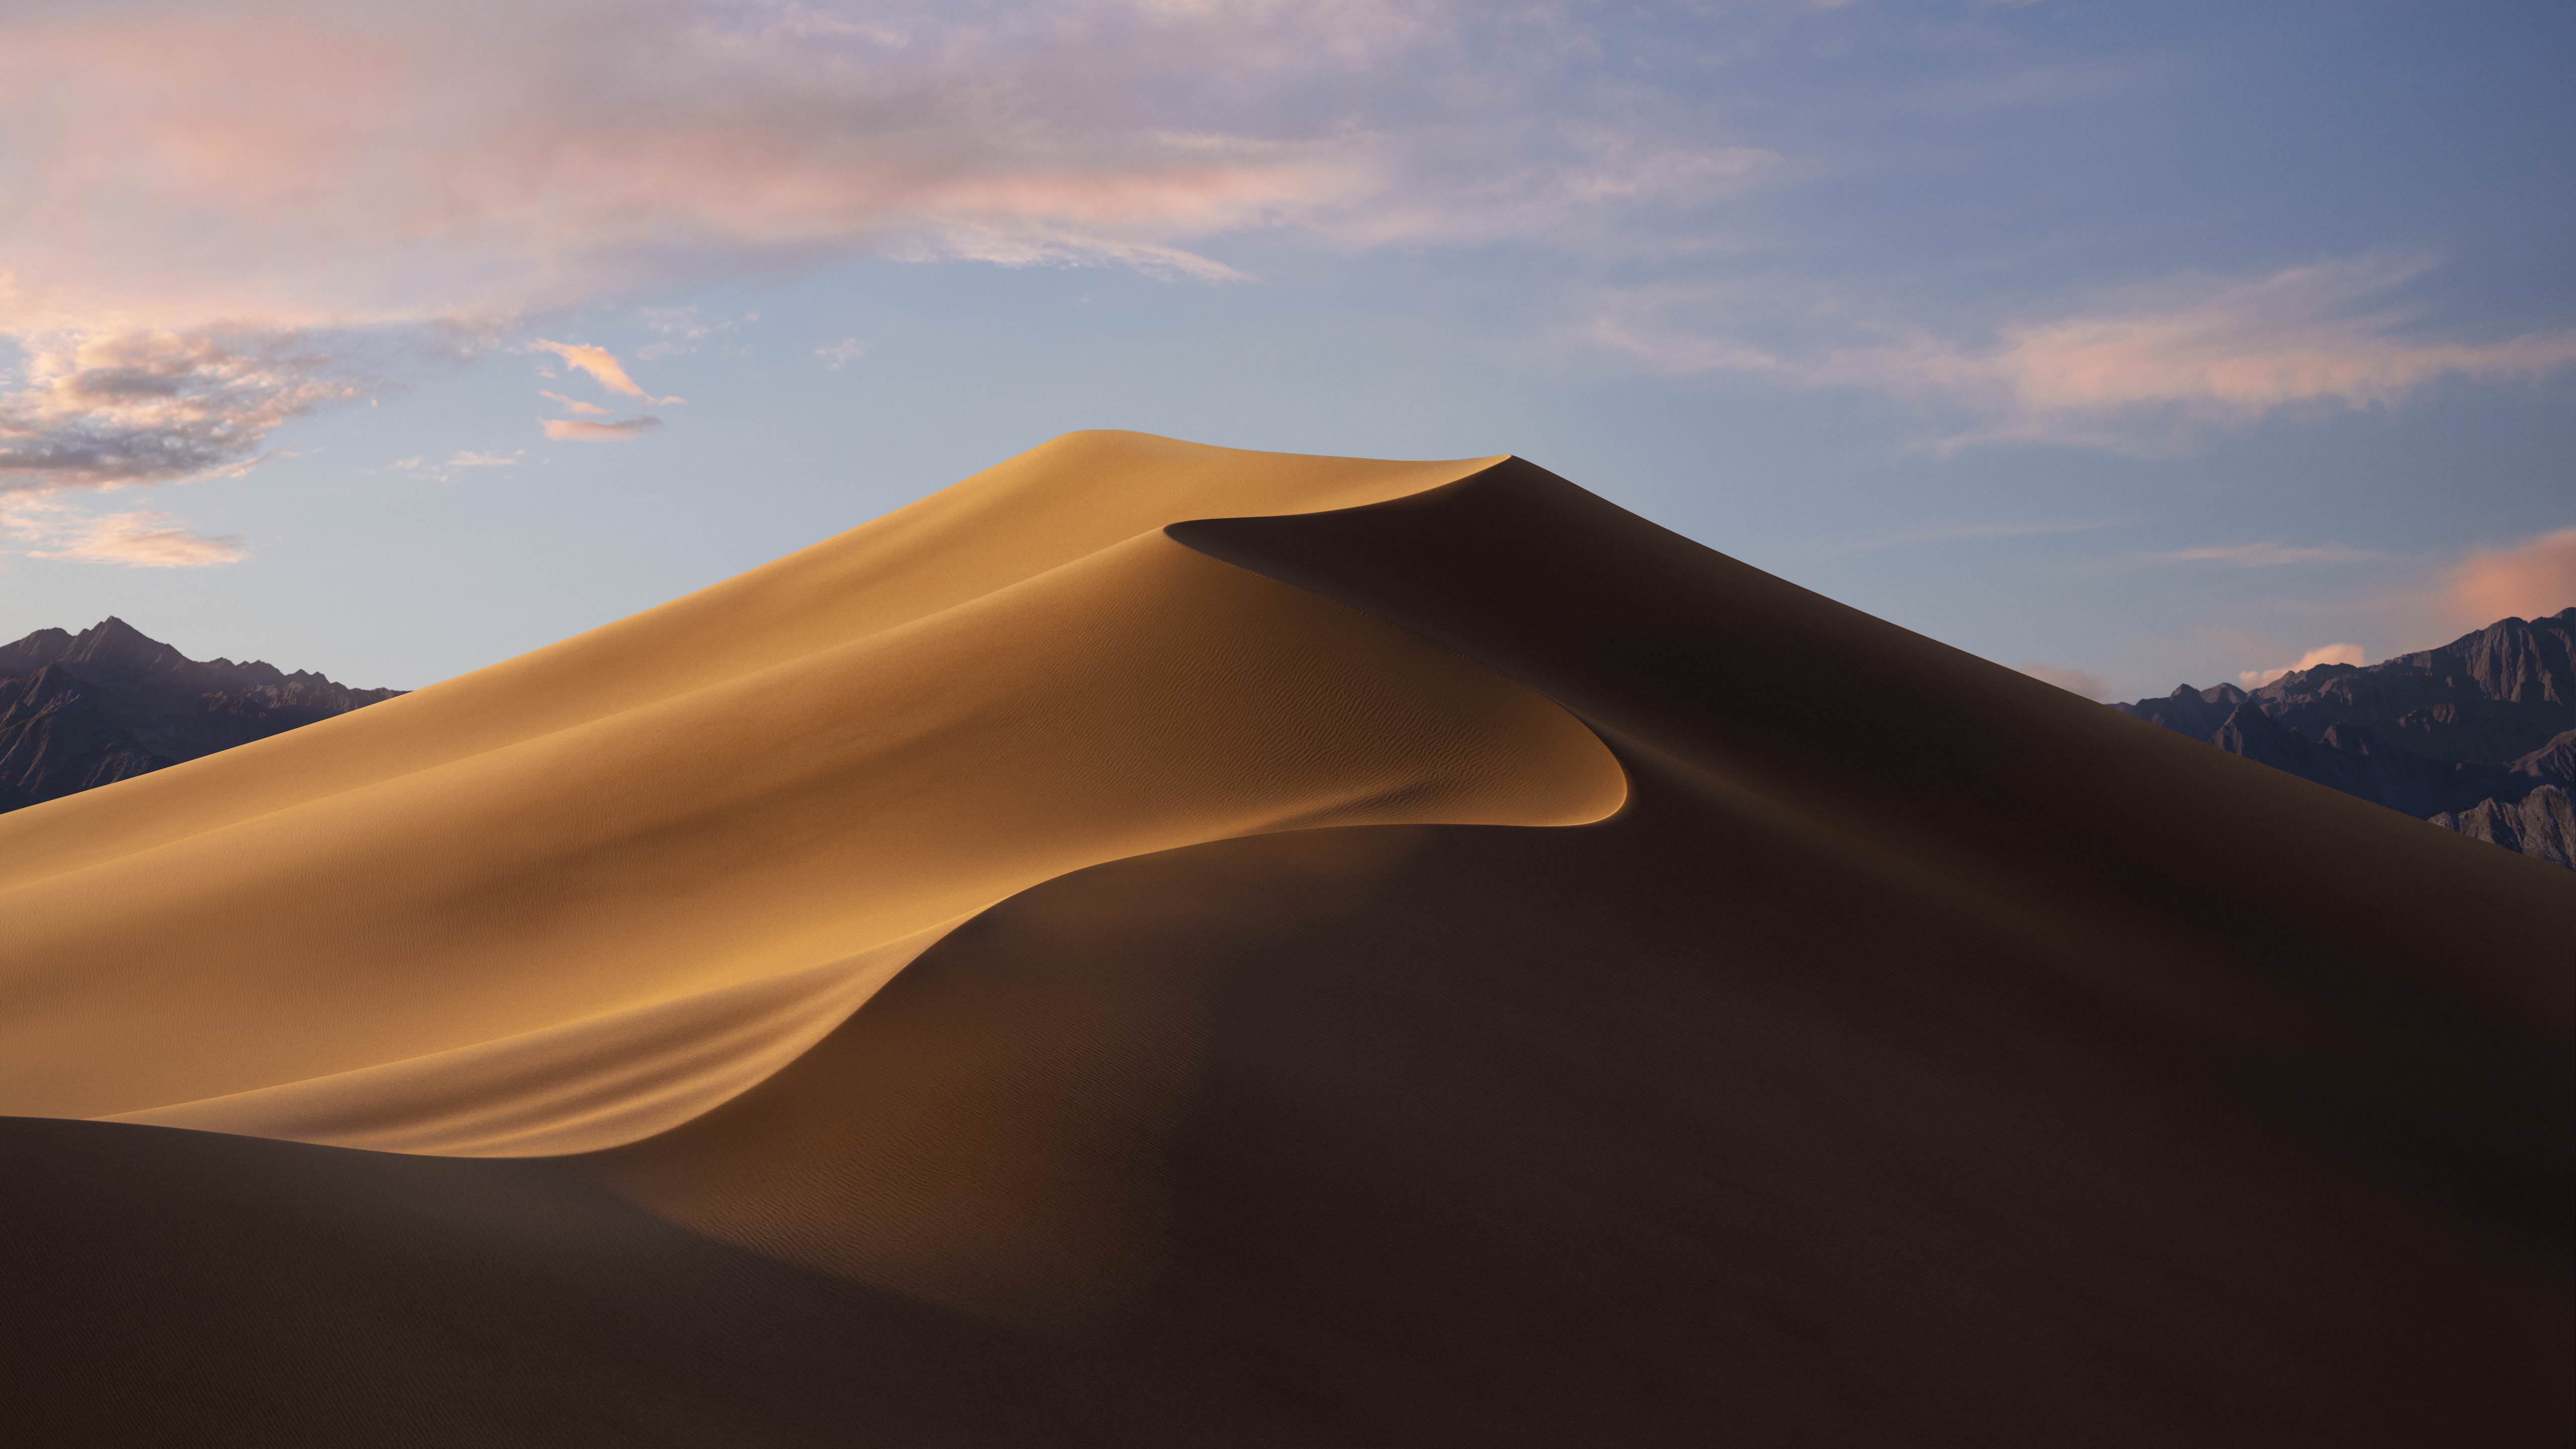 Download the macOS Mojave Wallpaper Day & Night Versions